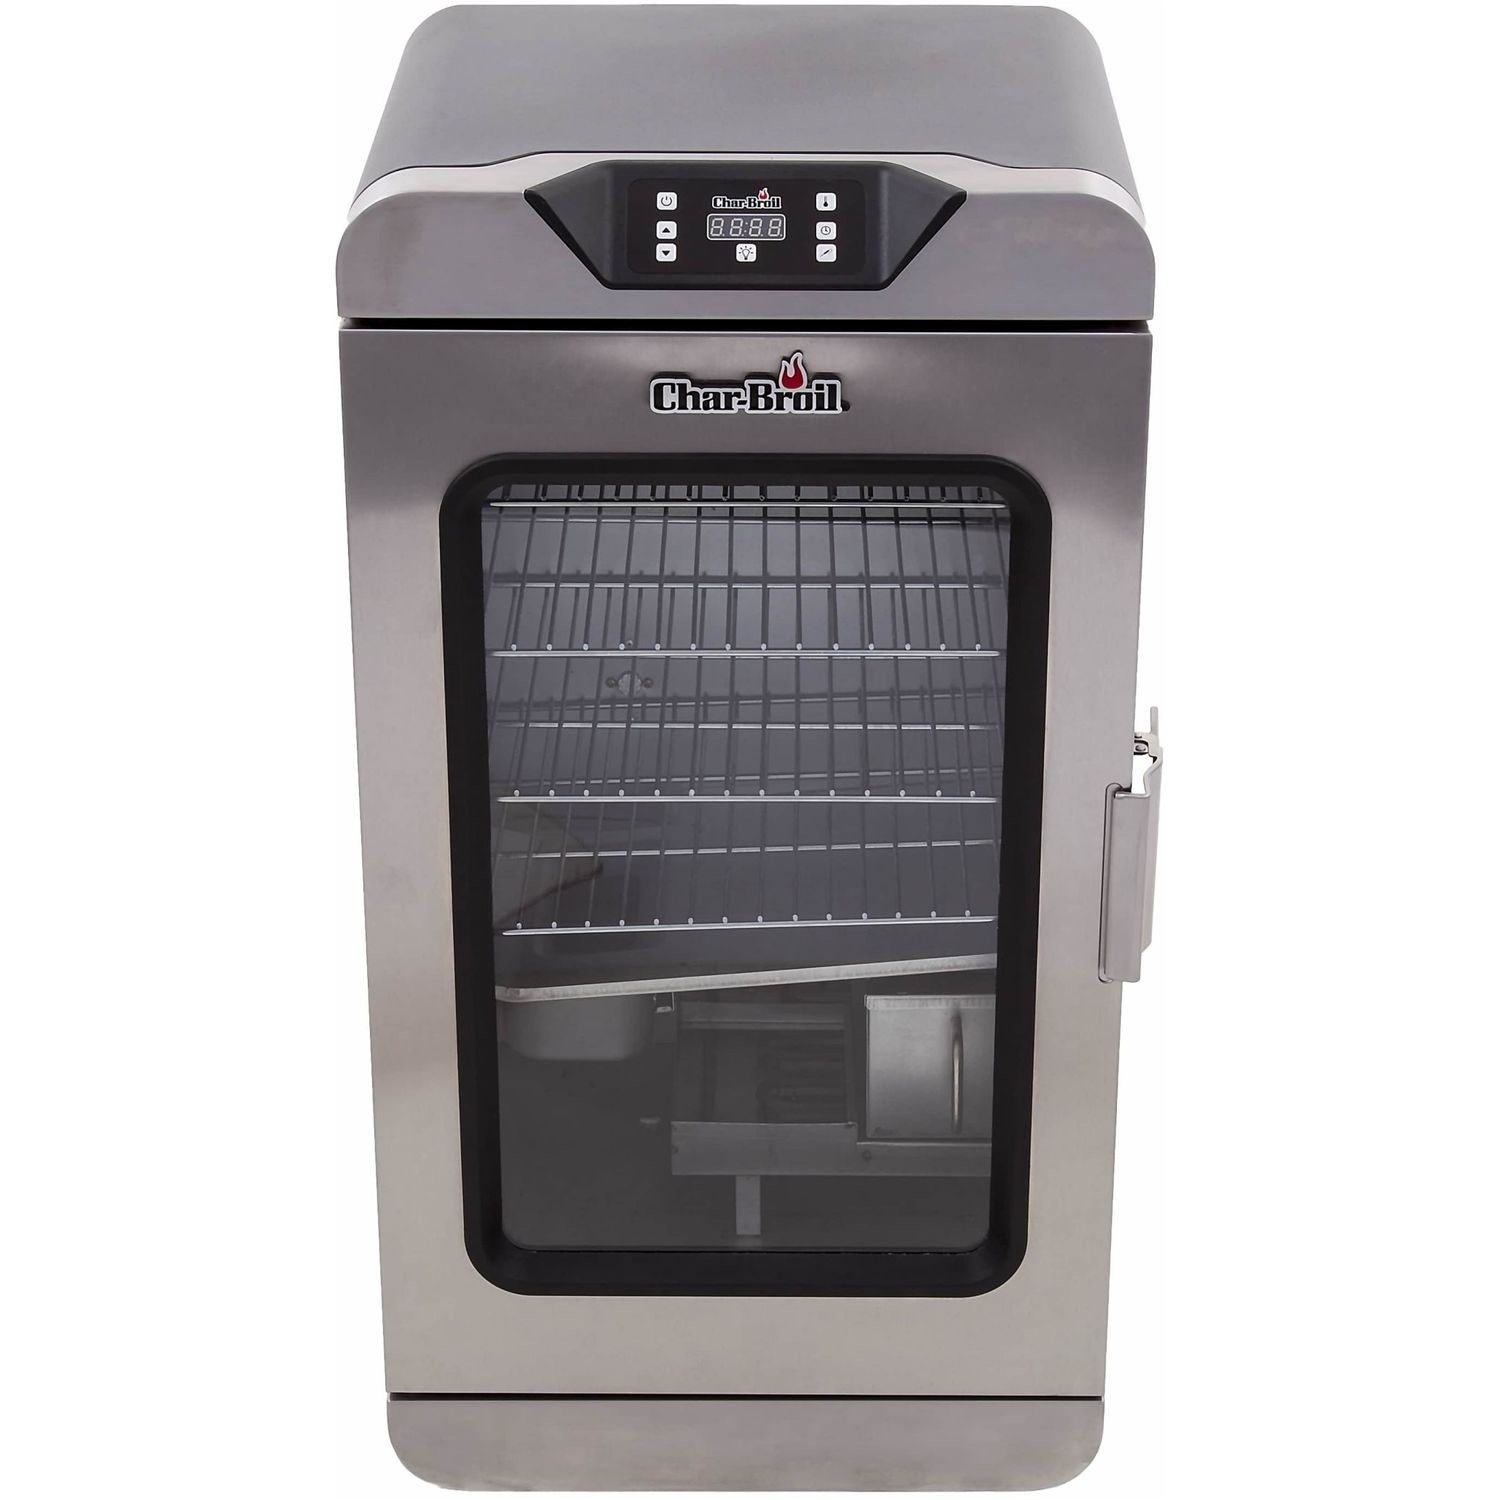 Char-Broil Digital Smoker II - Electric Smoker BBQ Grill - Stainless Steel